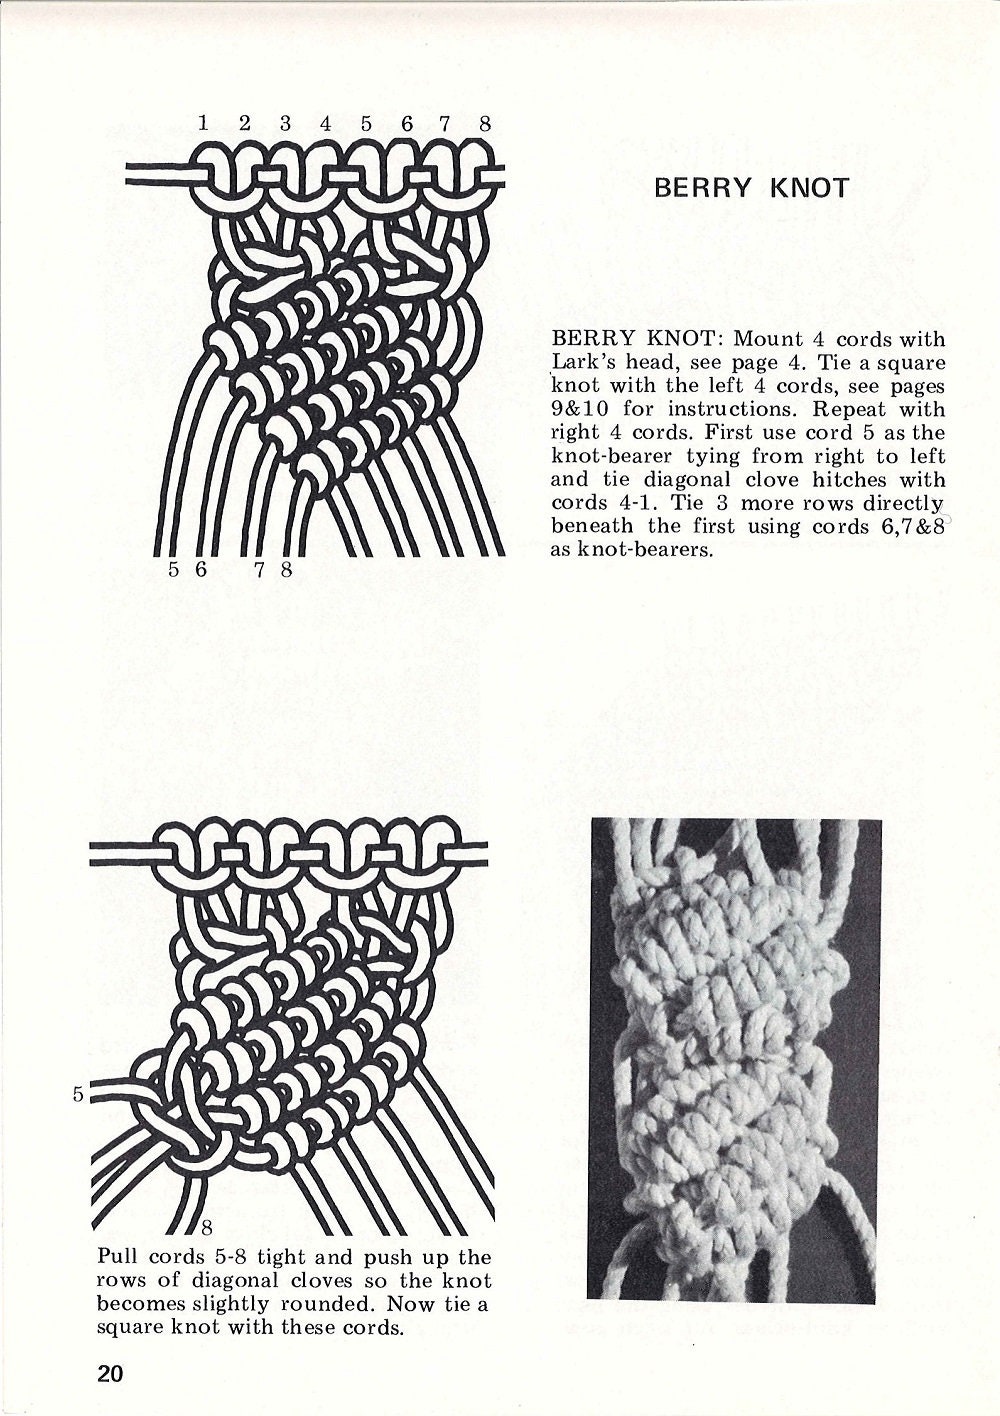 Macramé Pattern Book: Includes Over 70 Knots and Small Repeat